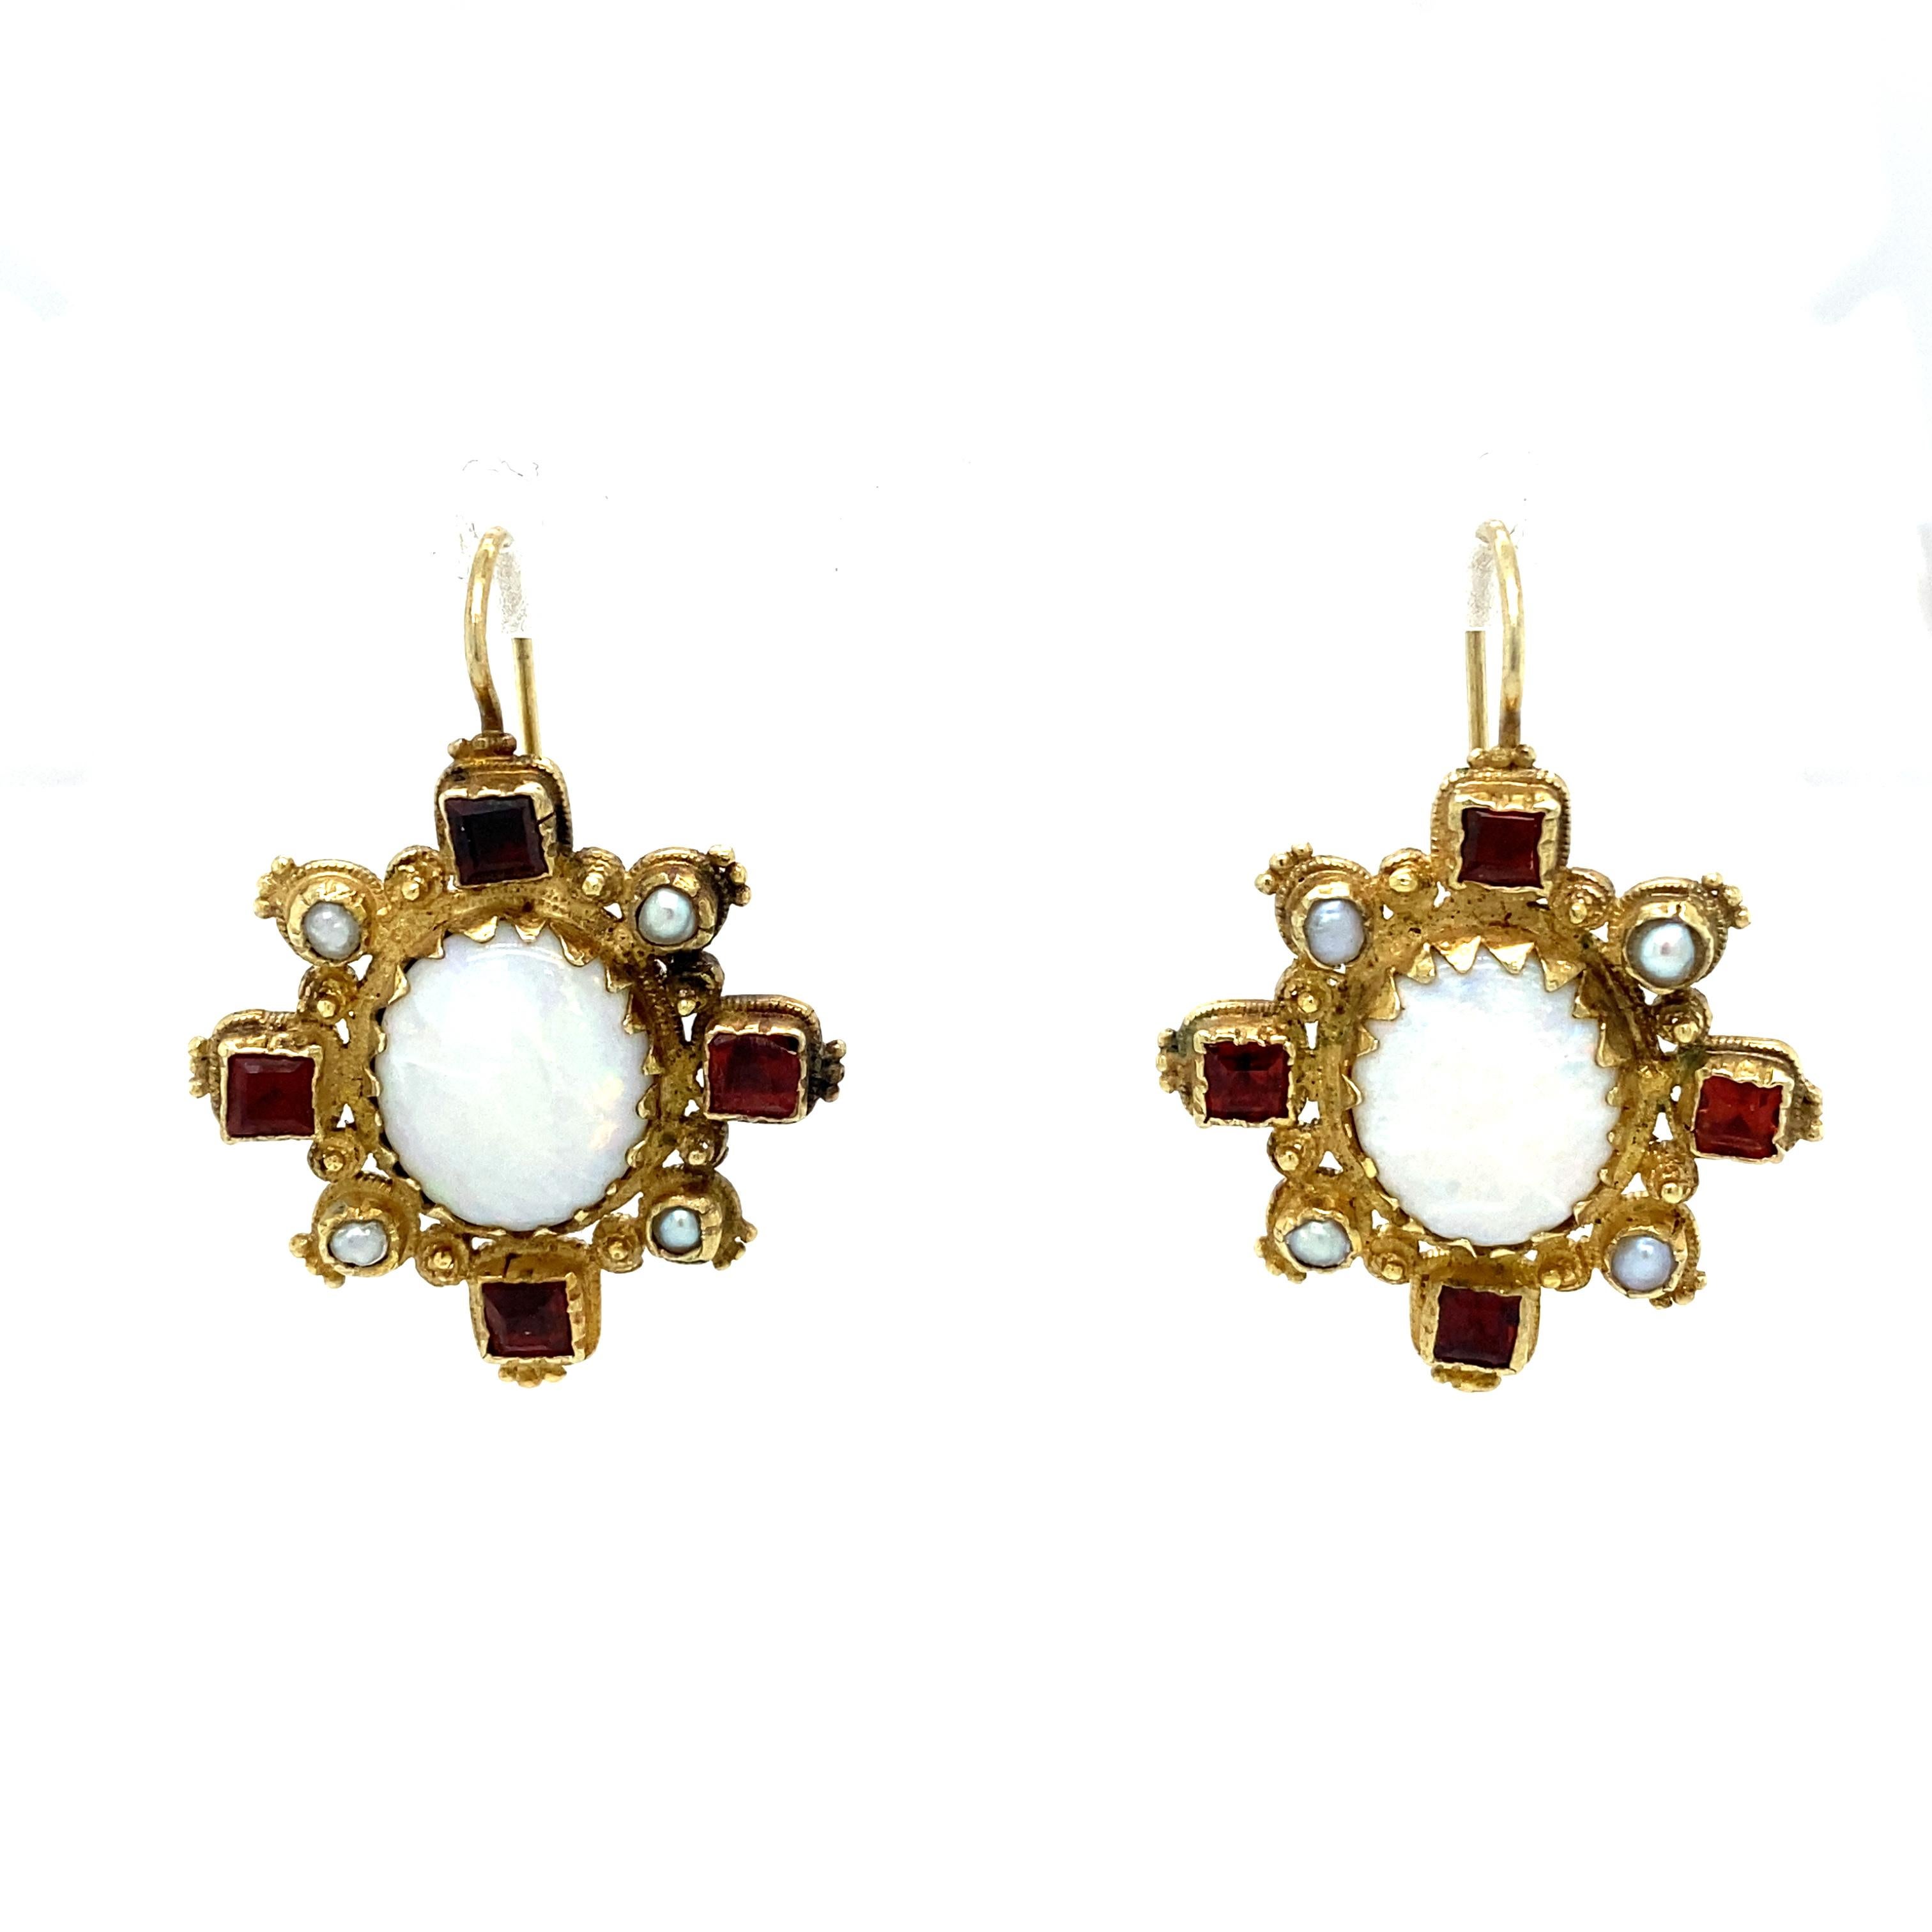 Item Details: These Renaissance-style earrings have opals, pearls and square cut garnets in an ornate 14k gold setting.

Circa: 1960s
Metal Type: 14 Karat Gold
Weight: 9.8 grams
Size: 1.25 inch Length 